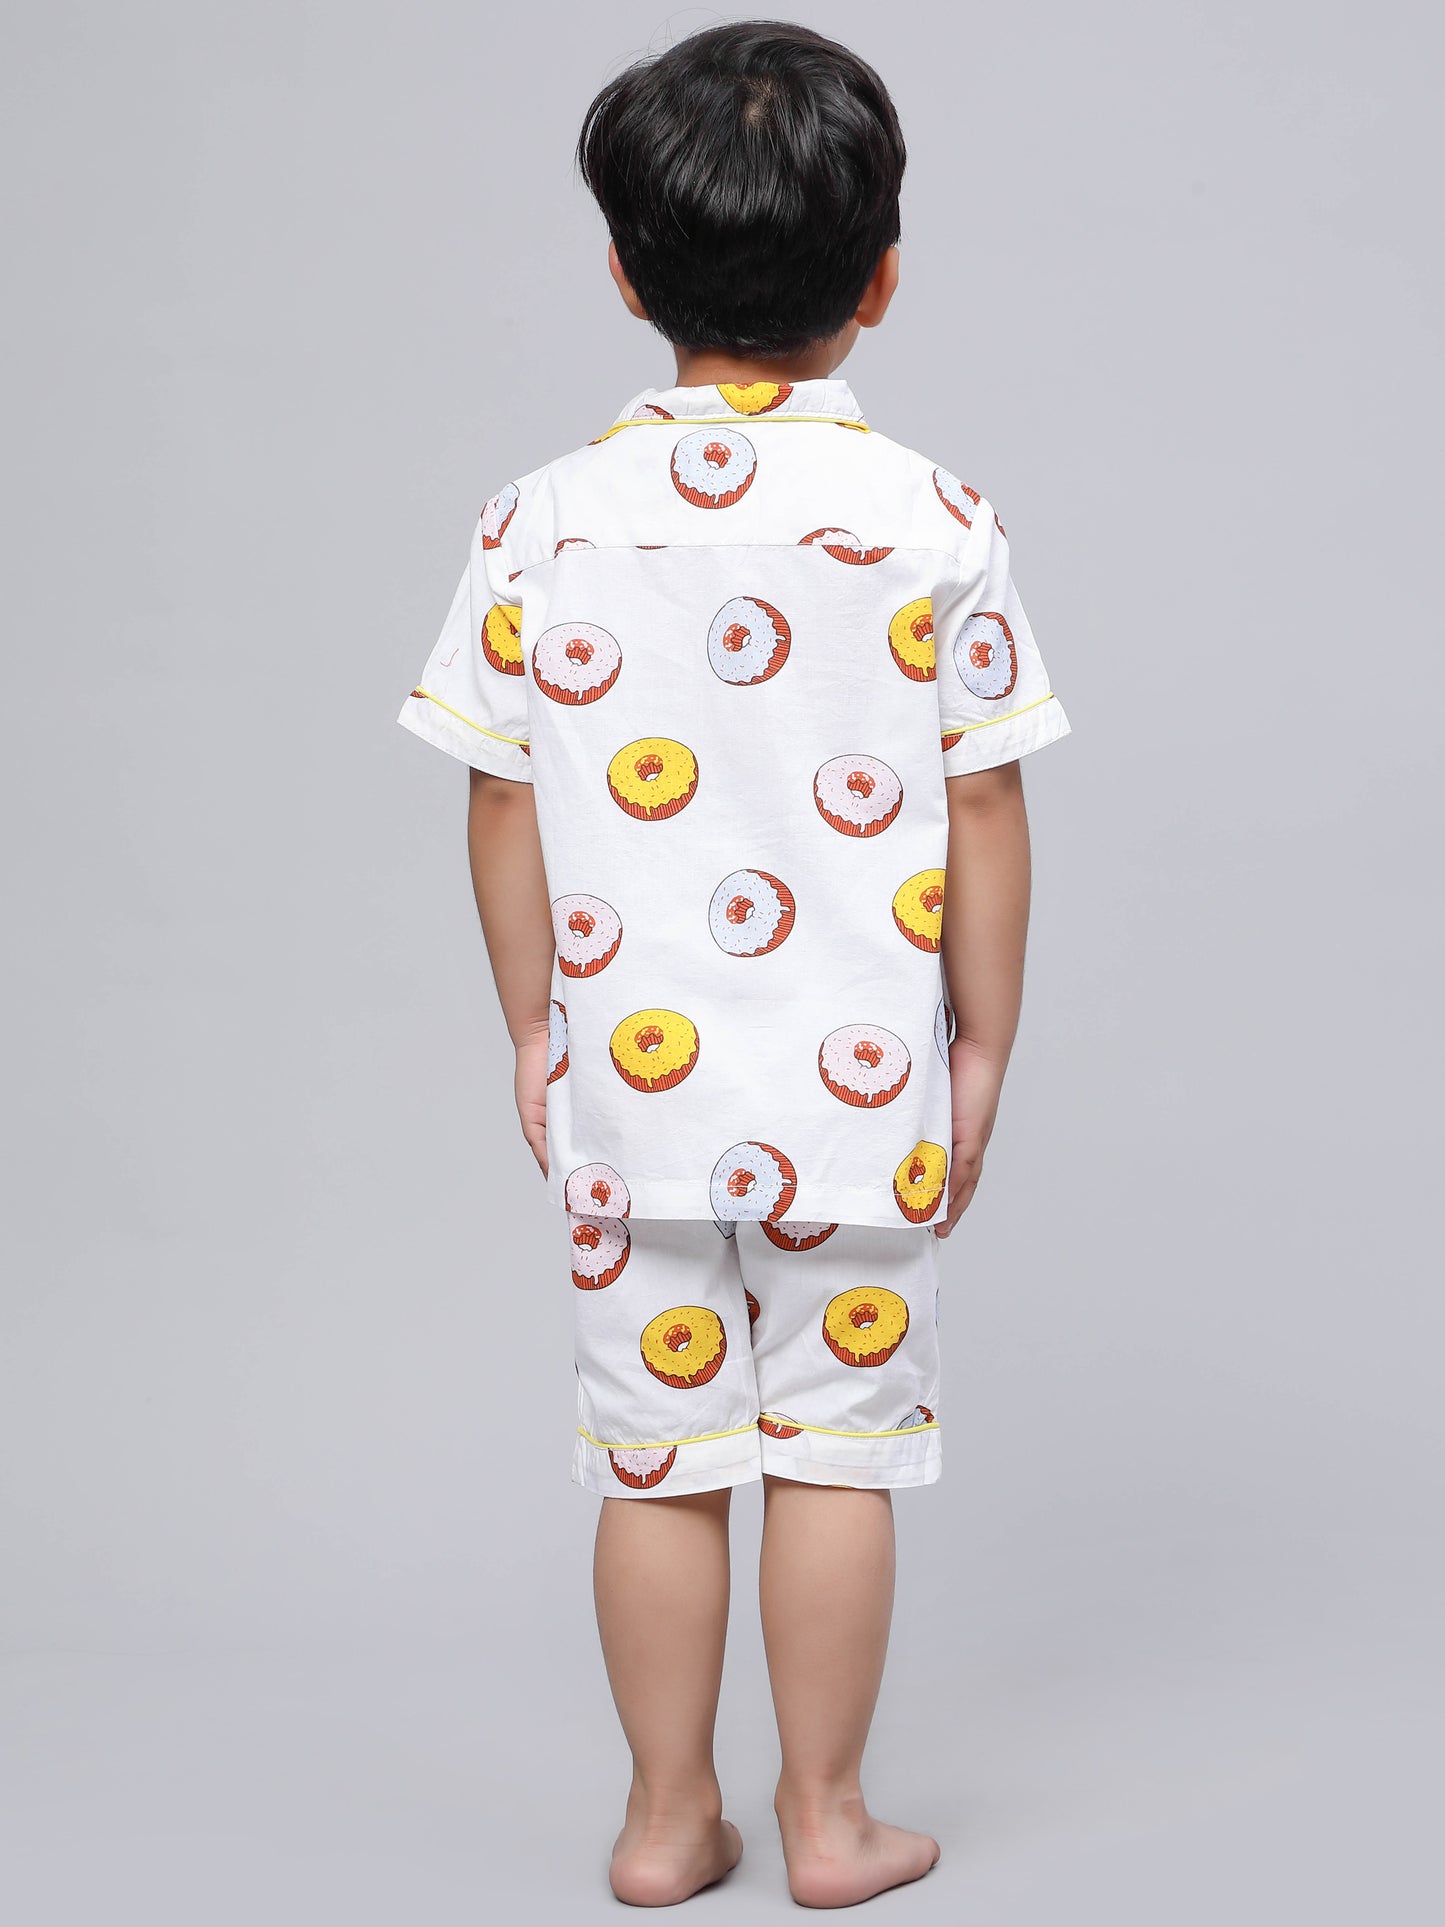 Notched Unisex nightsuit in Fun Donut Print- White